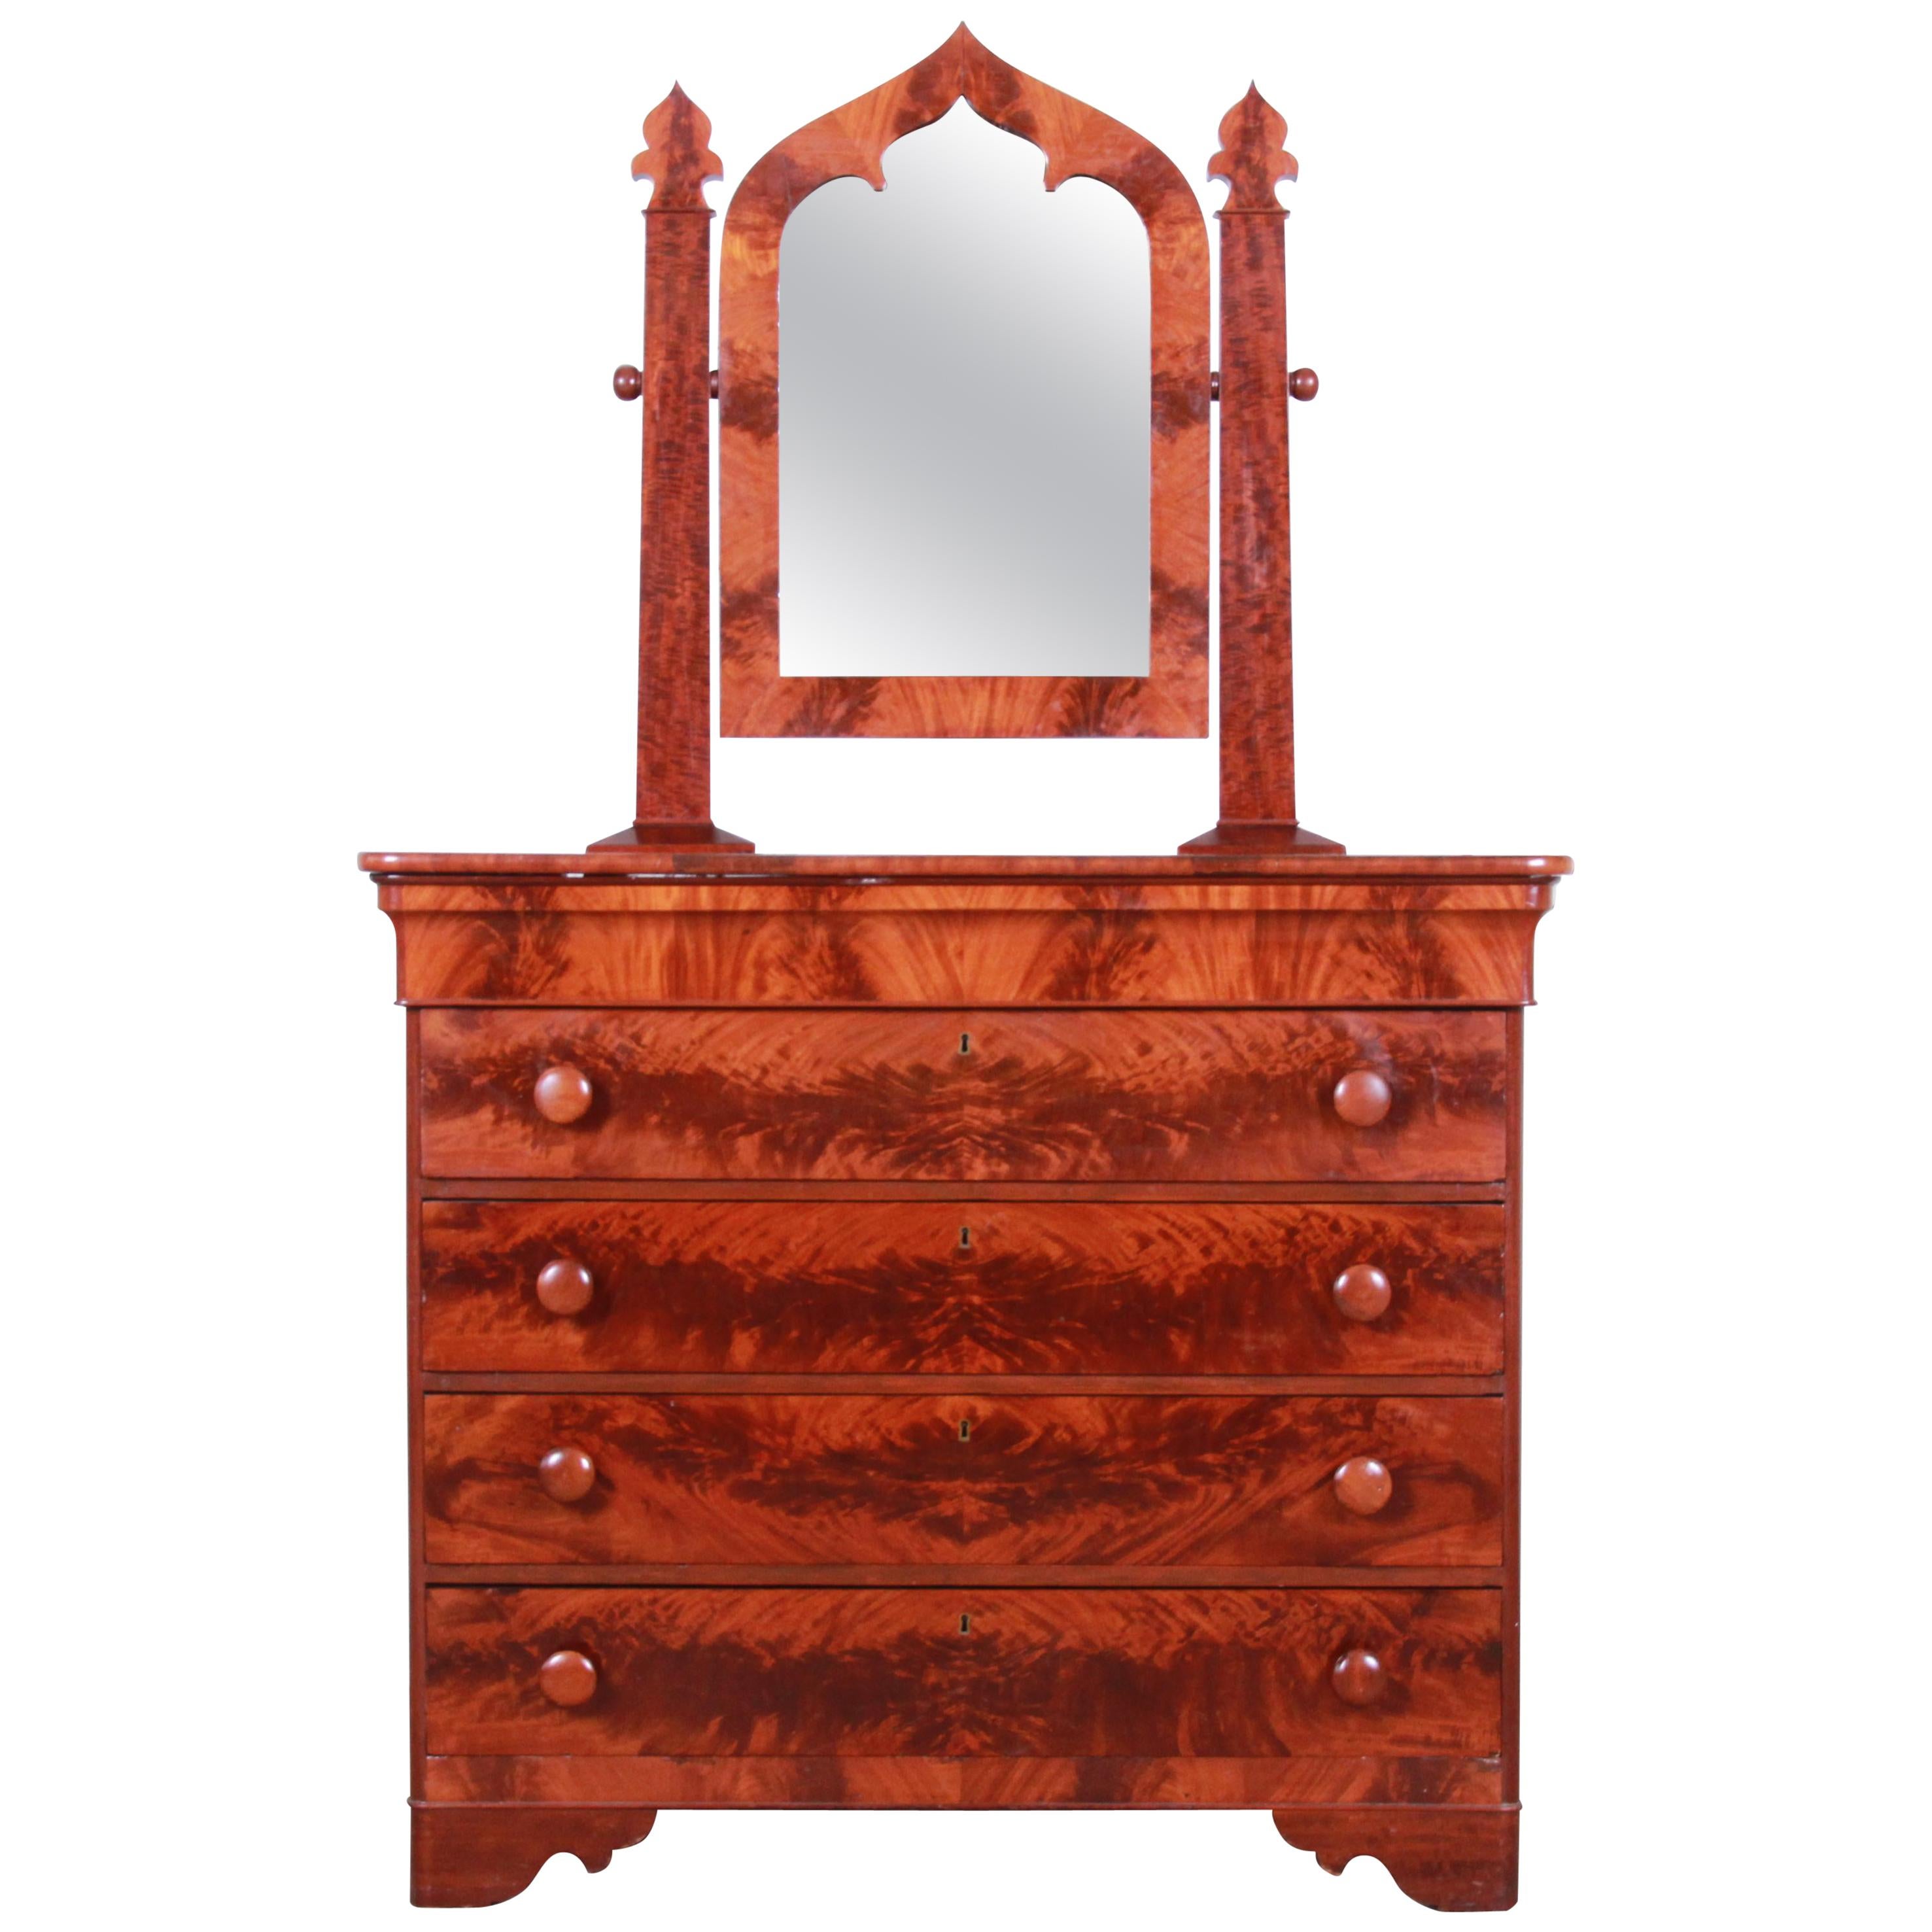 19th Century American Empire Flame Mahogany Dresser with Mirror